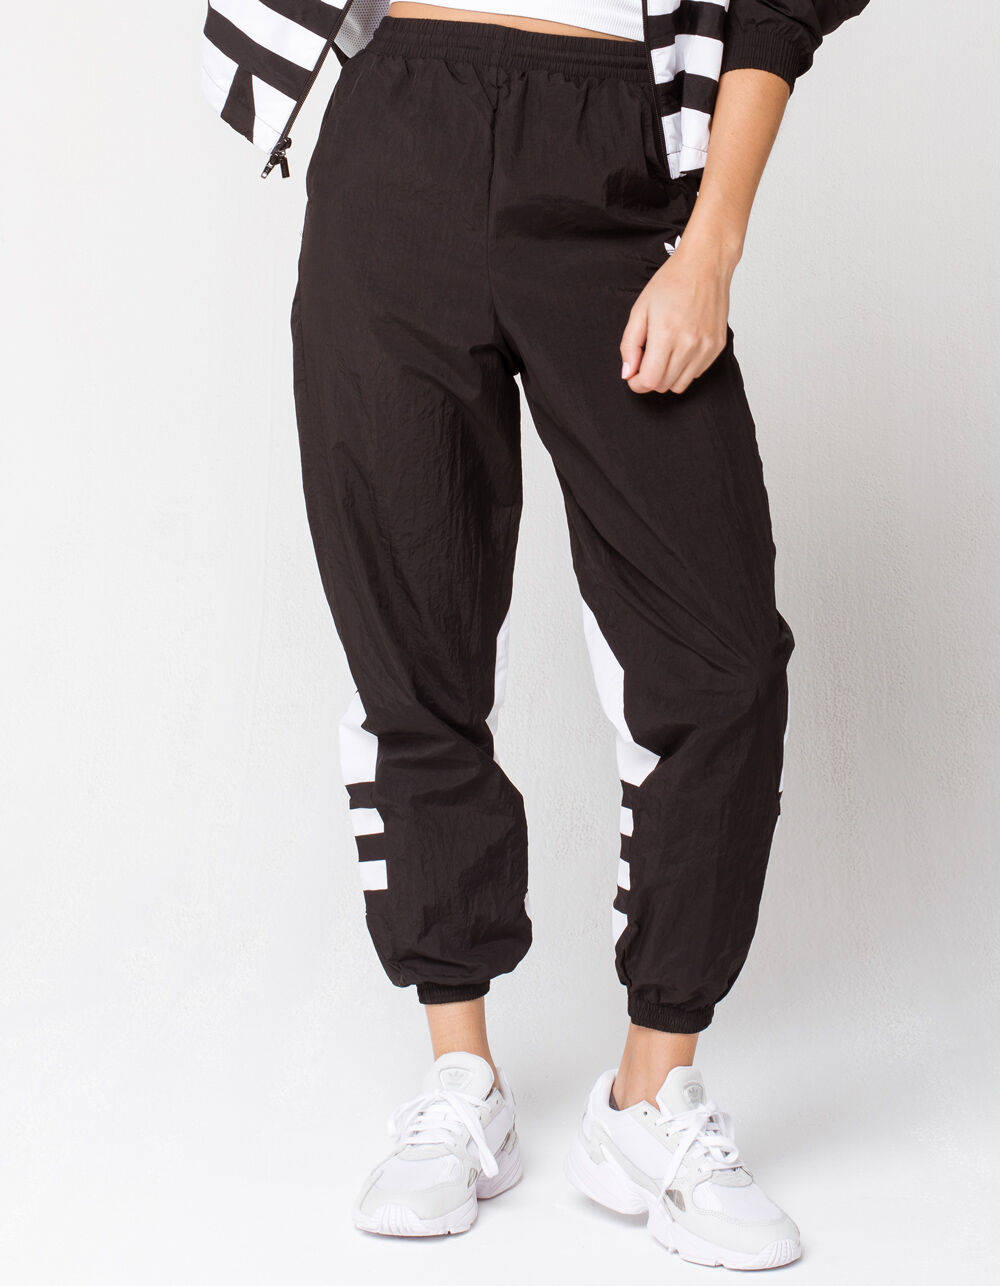 Adidas Track Pants - Buy Adidas Track Pants Online at Best Prices